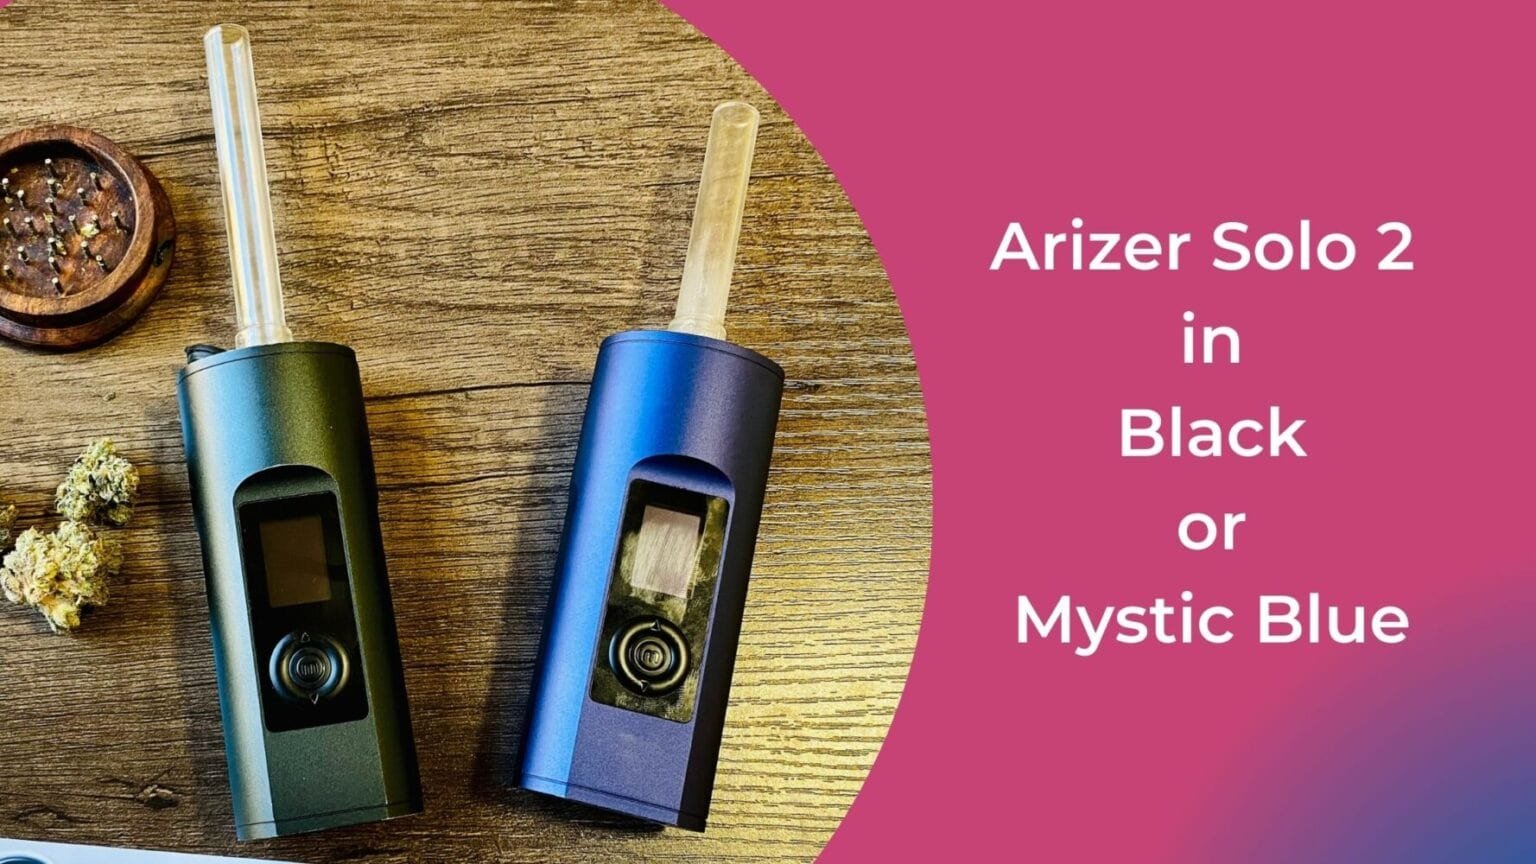 Discover The Arizer Solo 2 Dry Herb Vaporizer